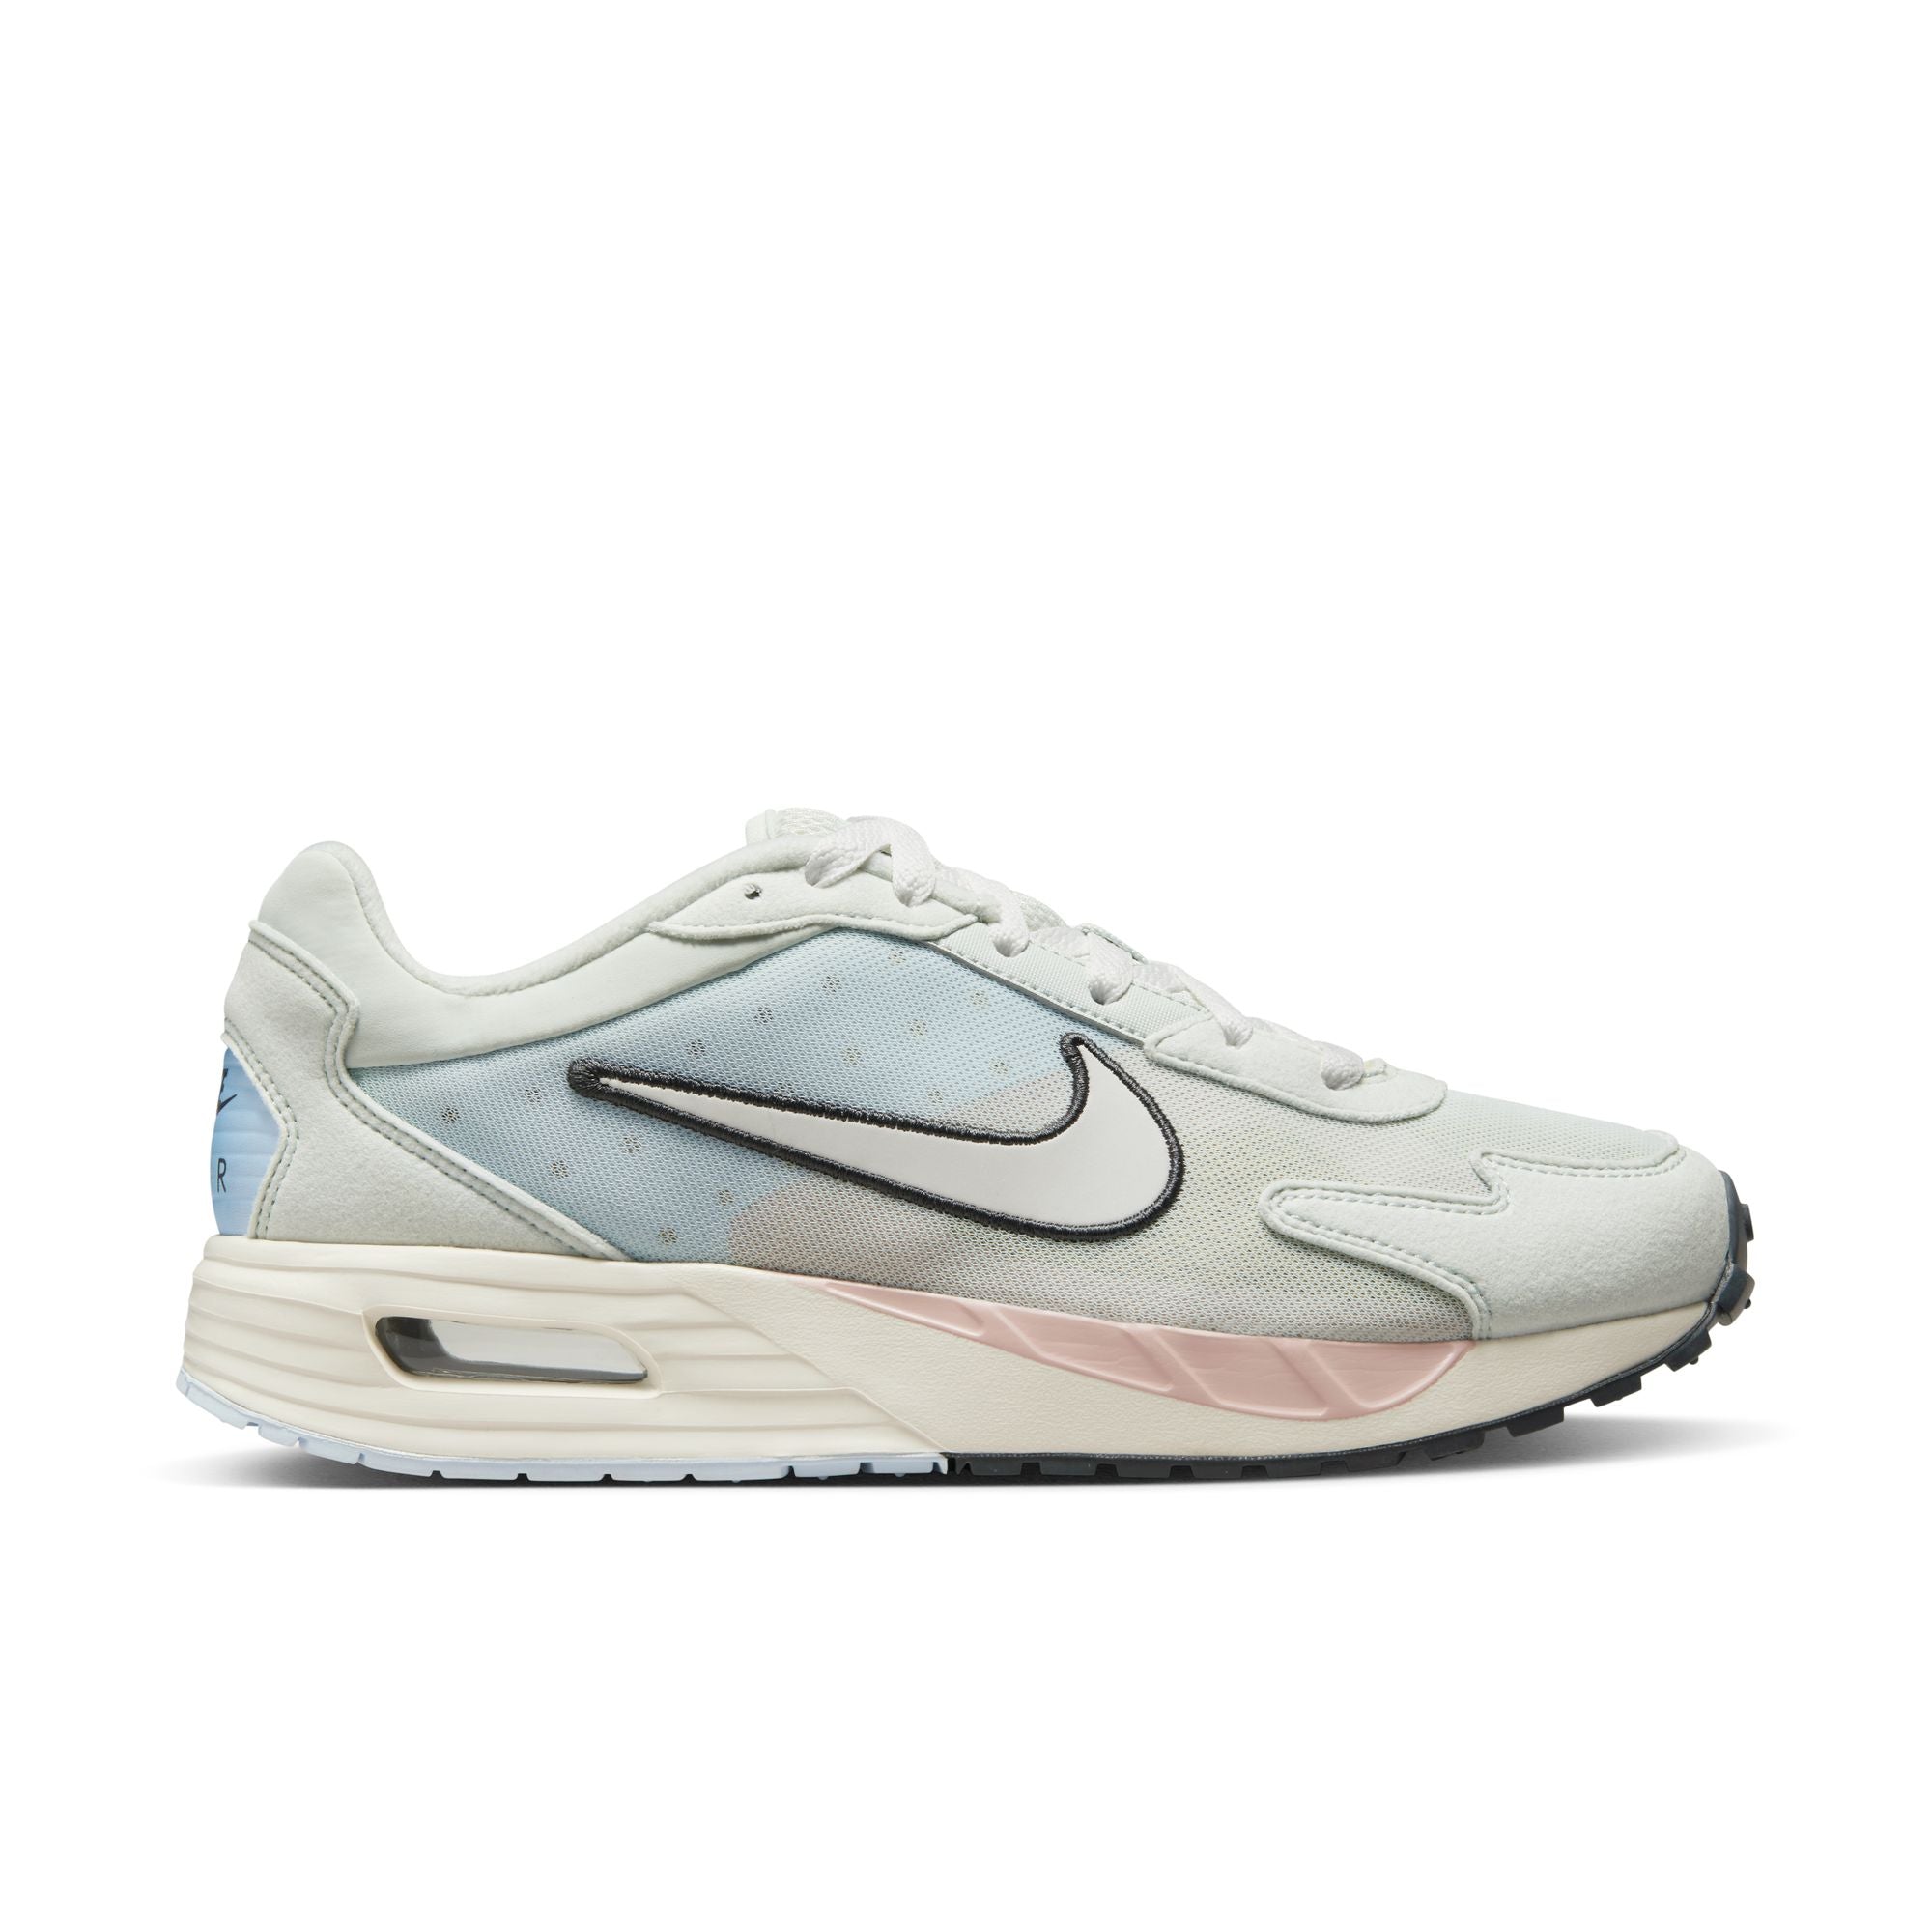 NIKE AIR MAX SOLO WOMEN'S SHOES